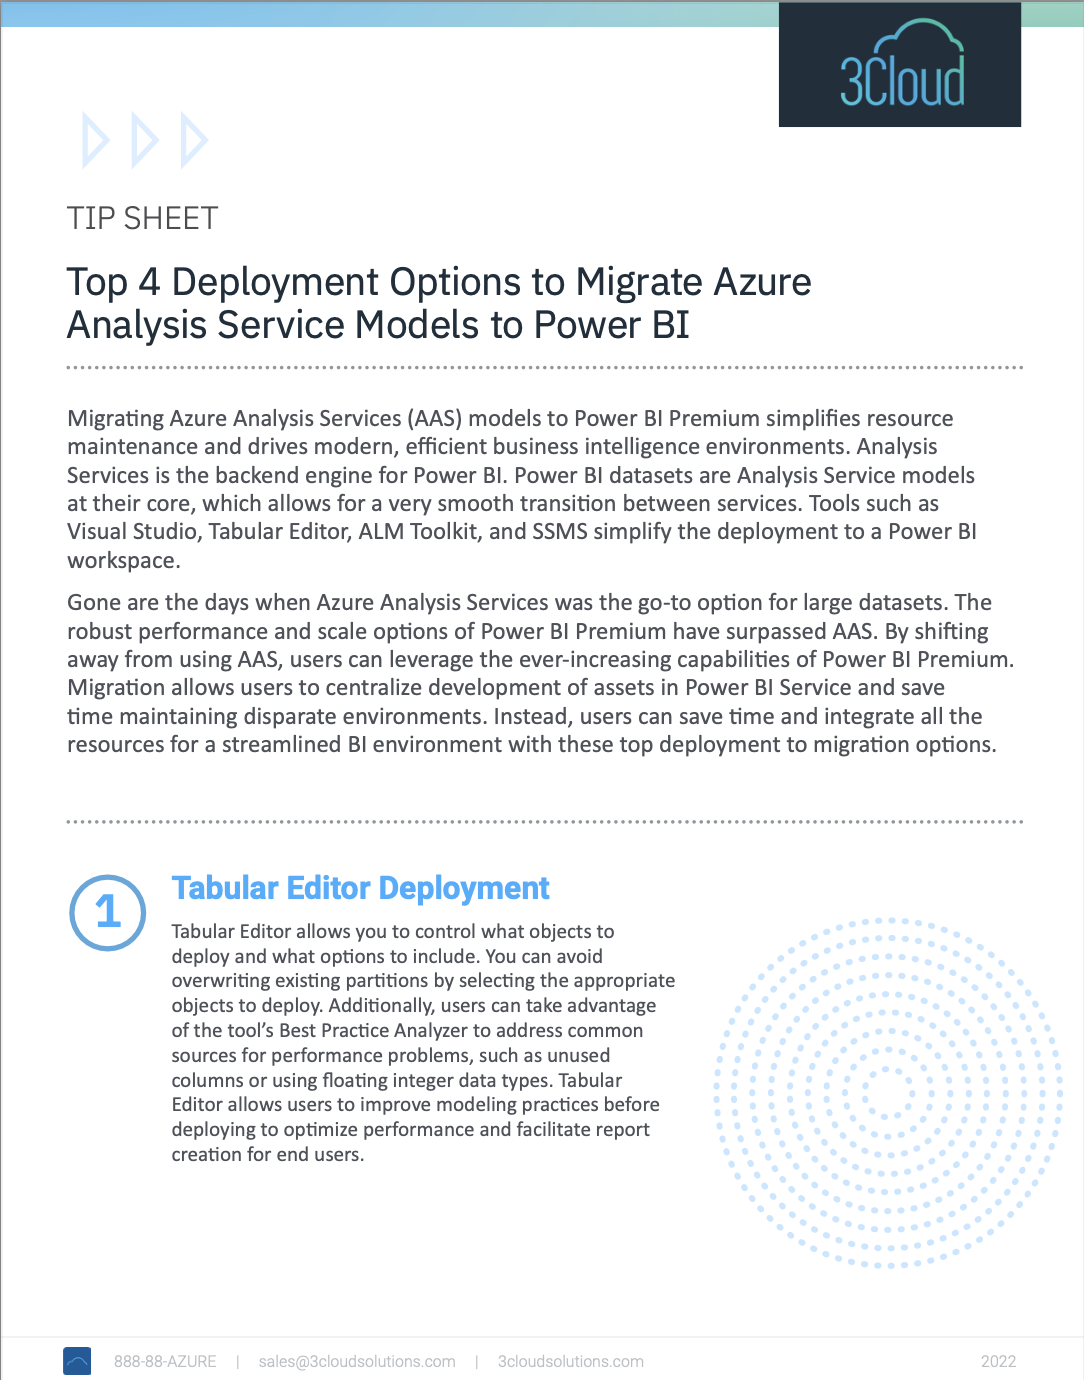 4 Deployment Options to Migrate AAS Models to Power BI